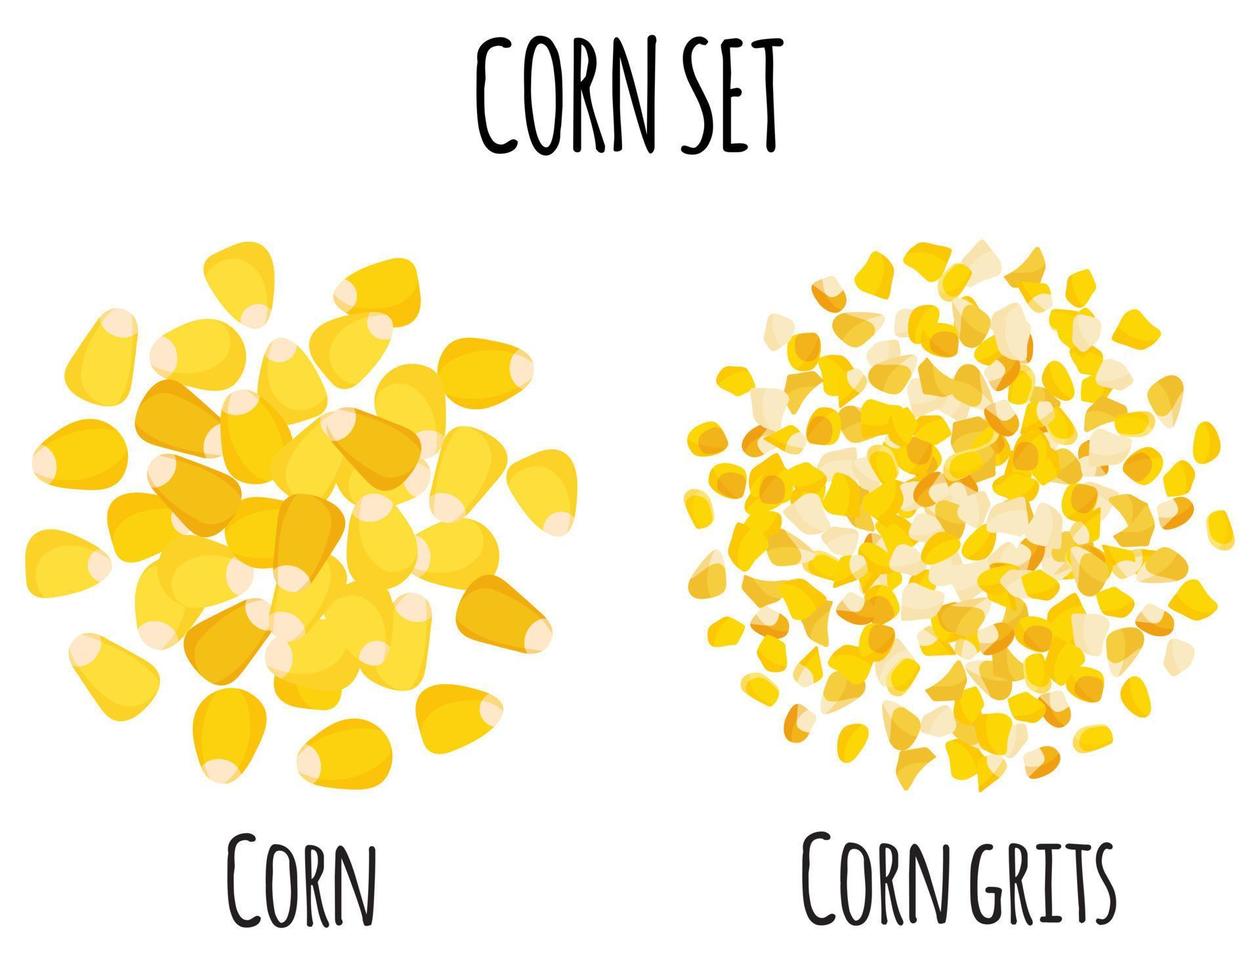 Corn set with grain and grits. vector